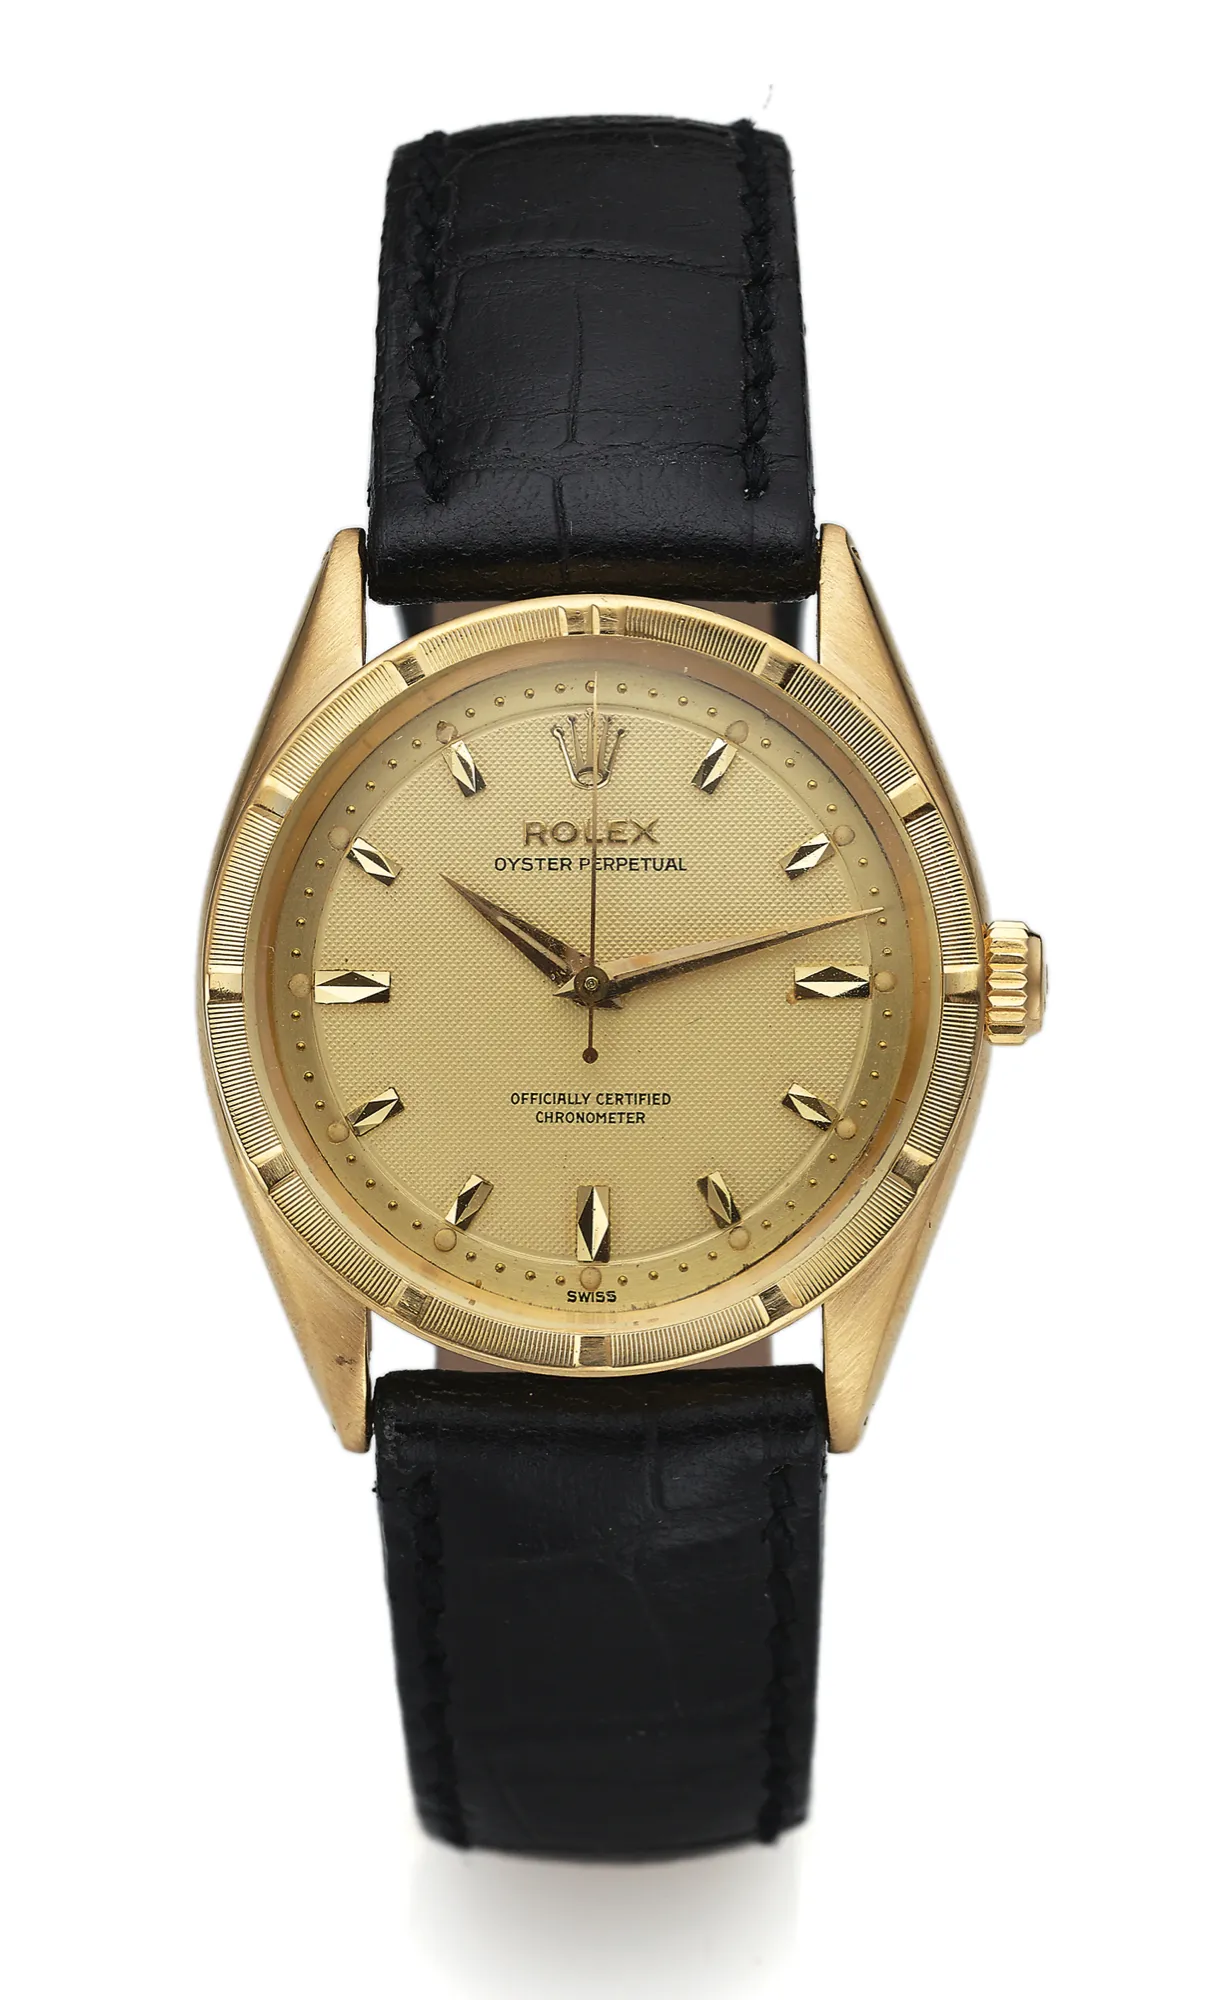 Rolex Oyster Perpetual 6569 34mm Yellow gold Gilt dial